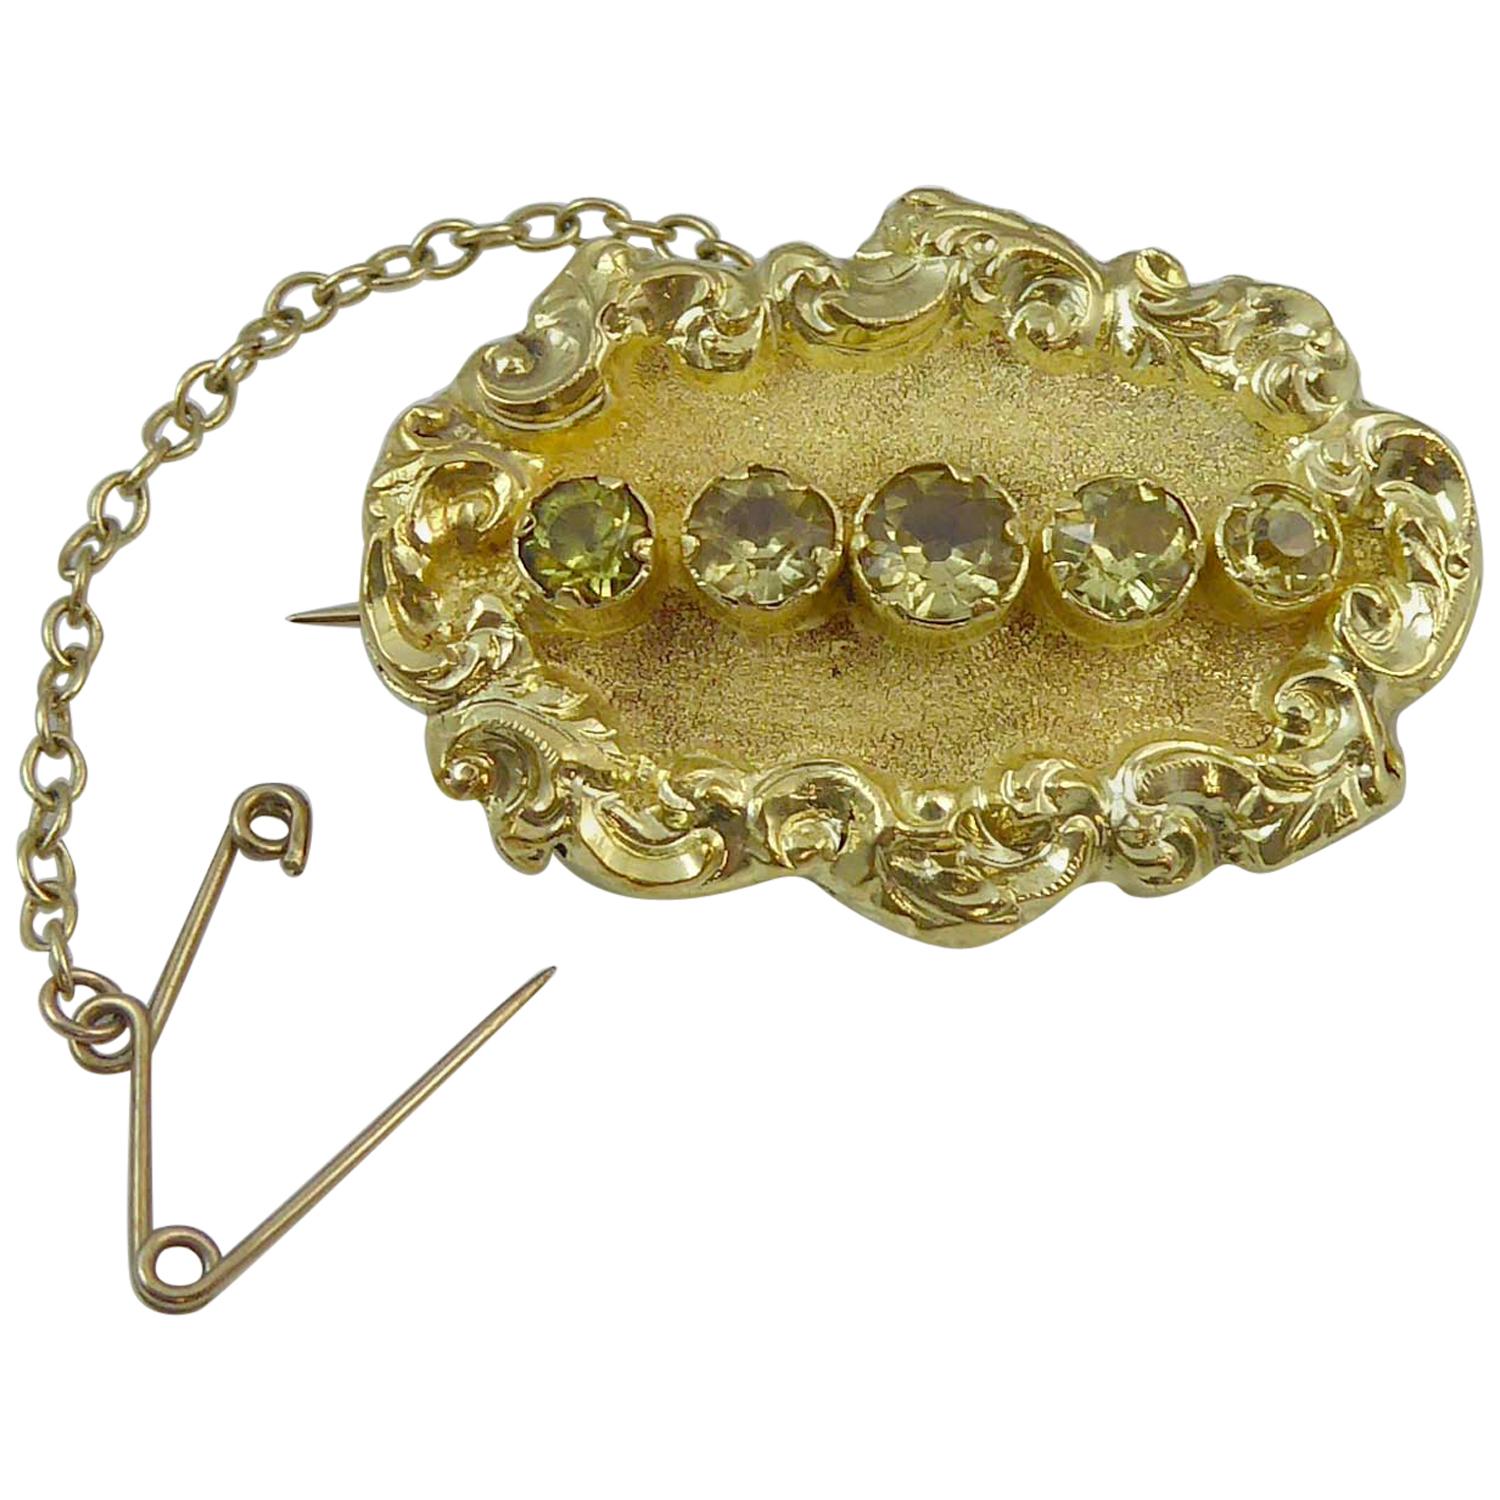 Victorian Antique Brooch, Yellow Gold and Peridot, circa 1880s